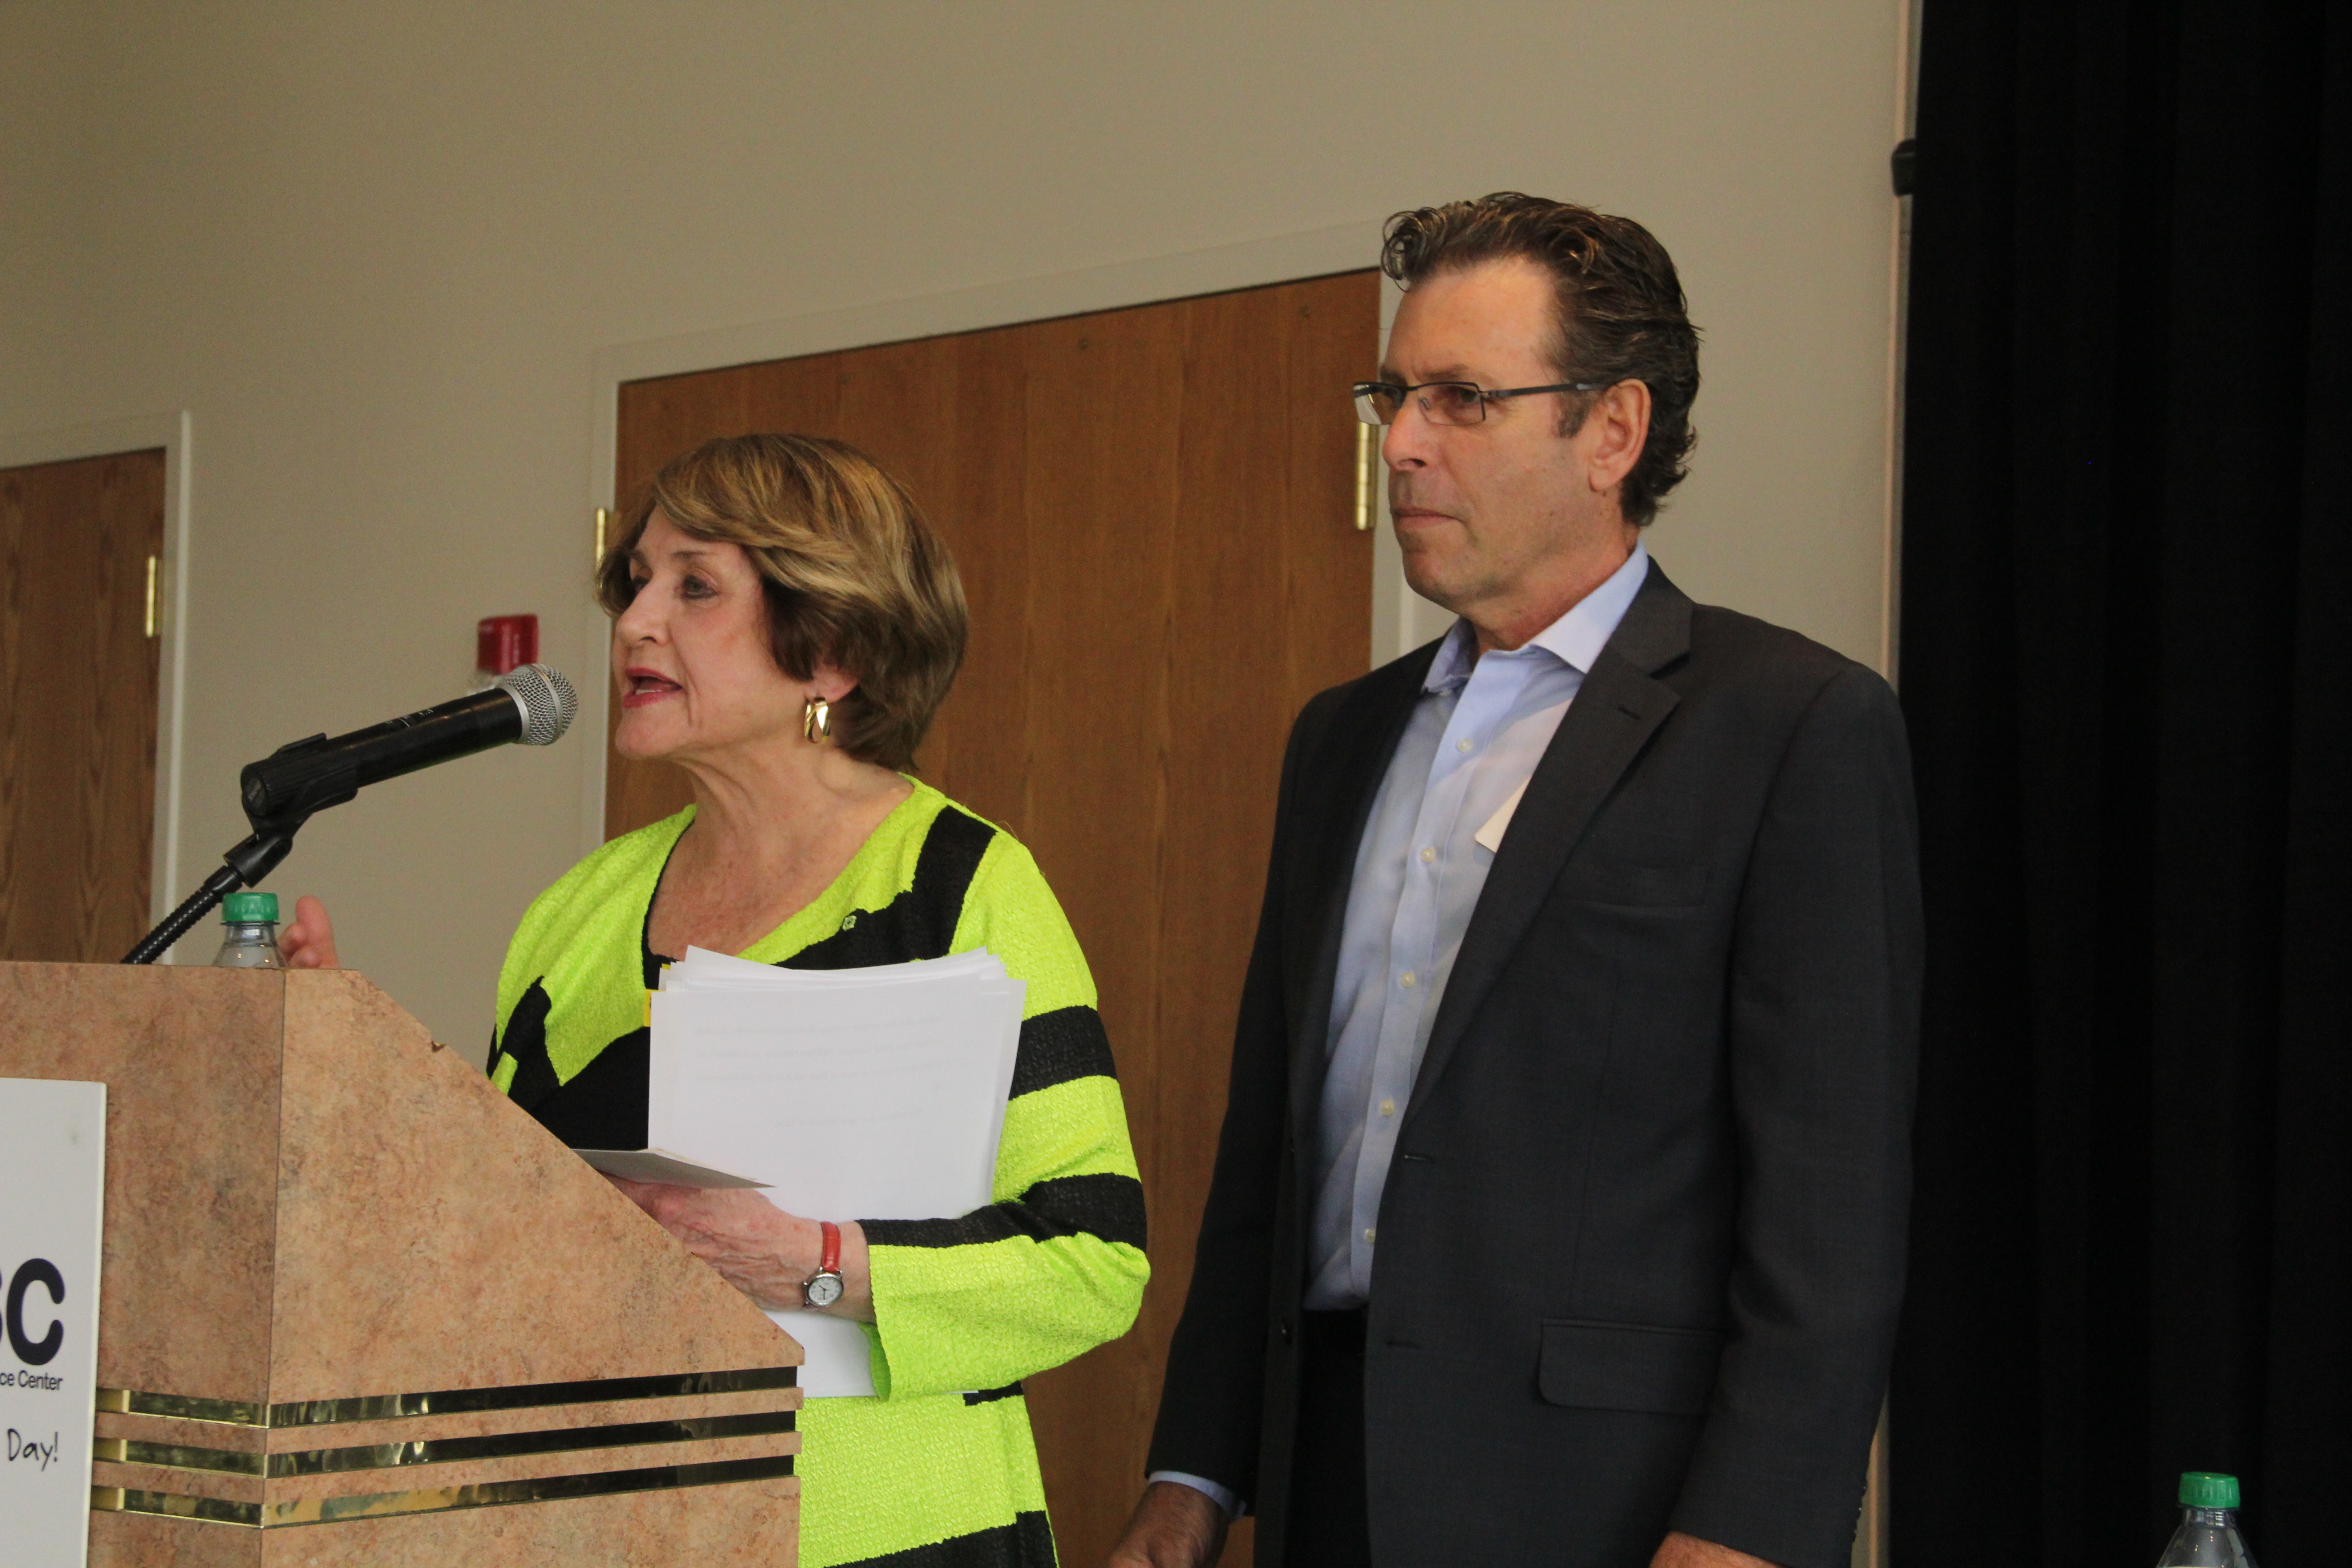 Congresswoman Louise Slaughter delivers opening remarks at RRPC's Annual Meeting Sept. 4 as RRPC Executive Director Tom Battley looks on.